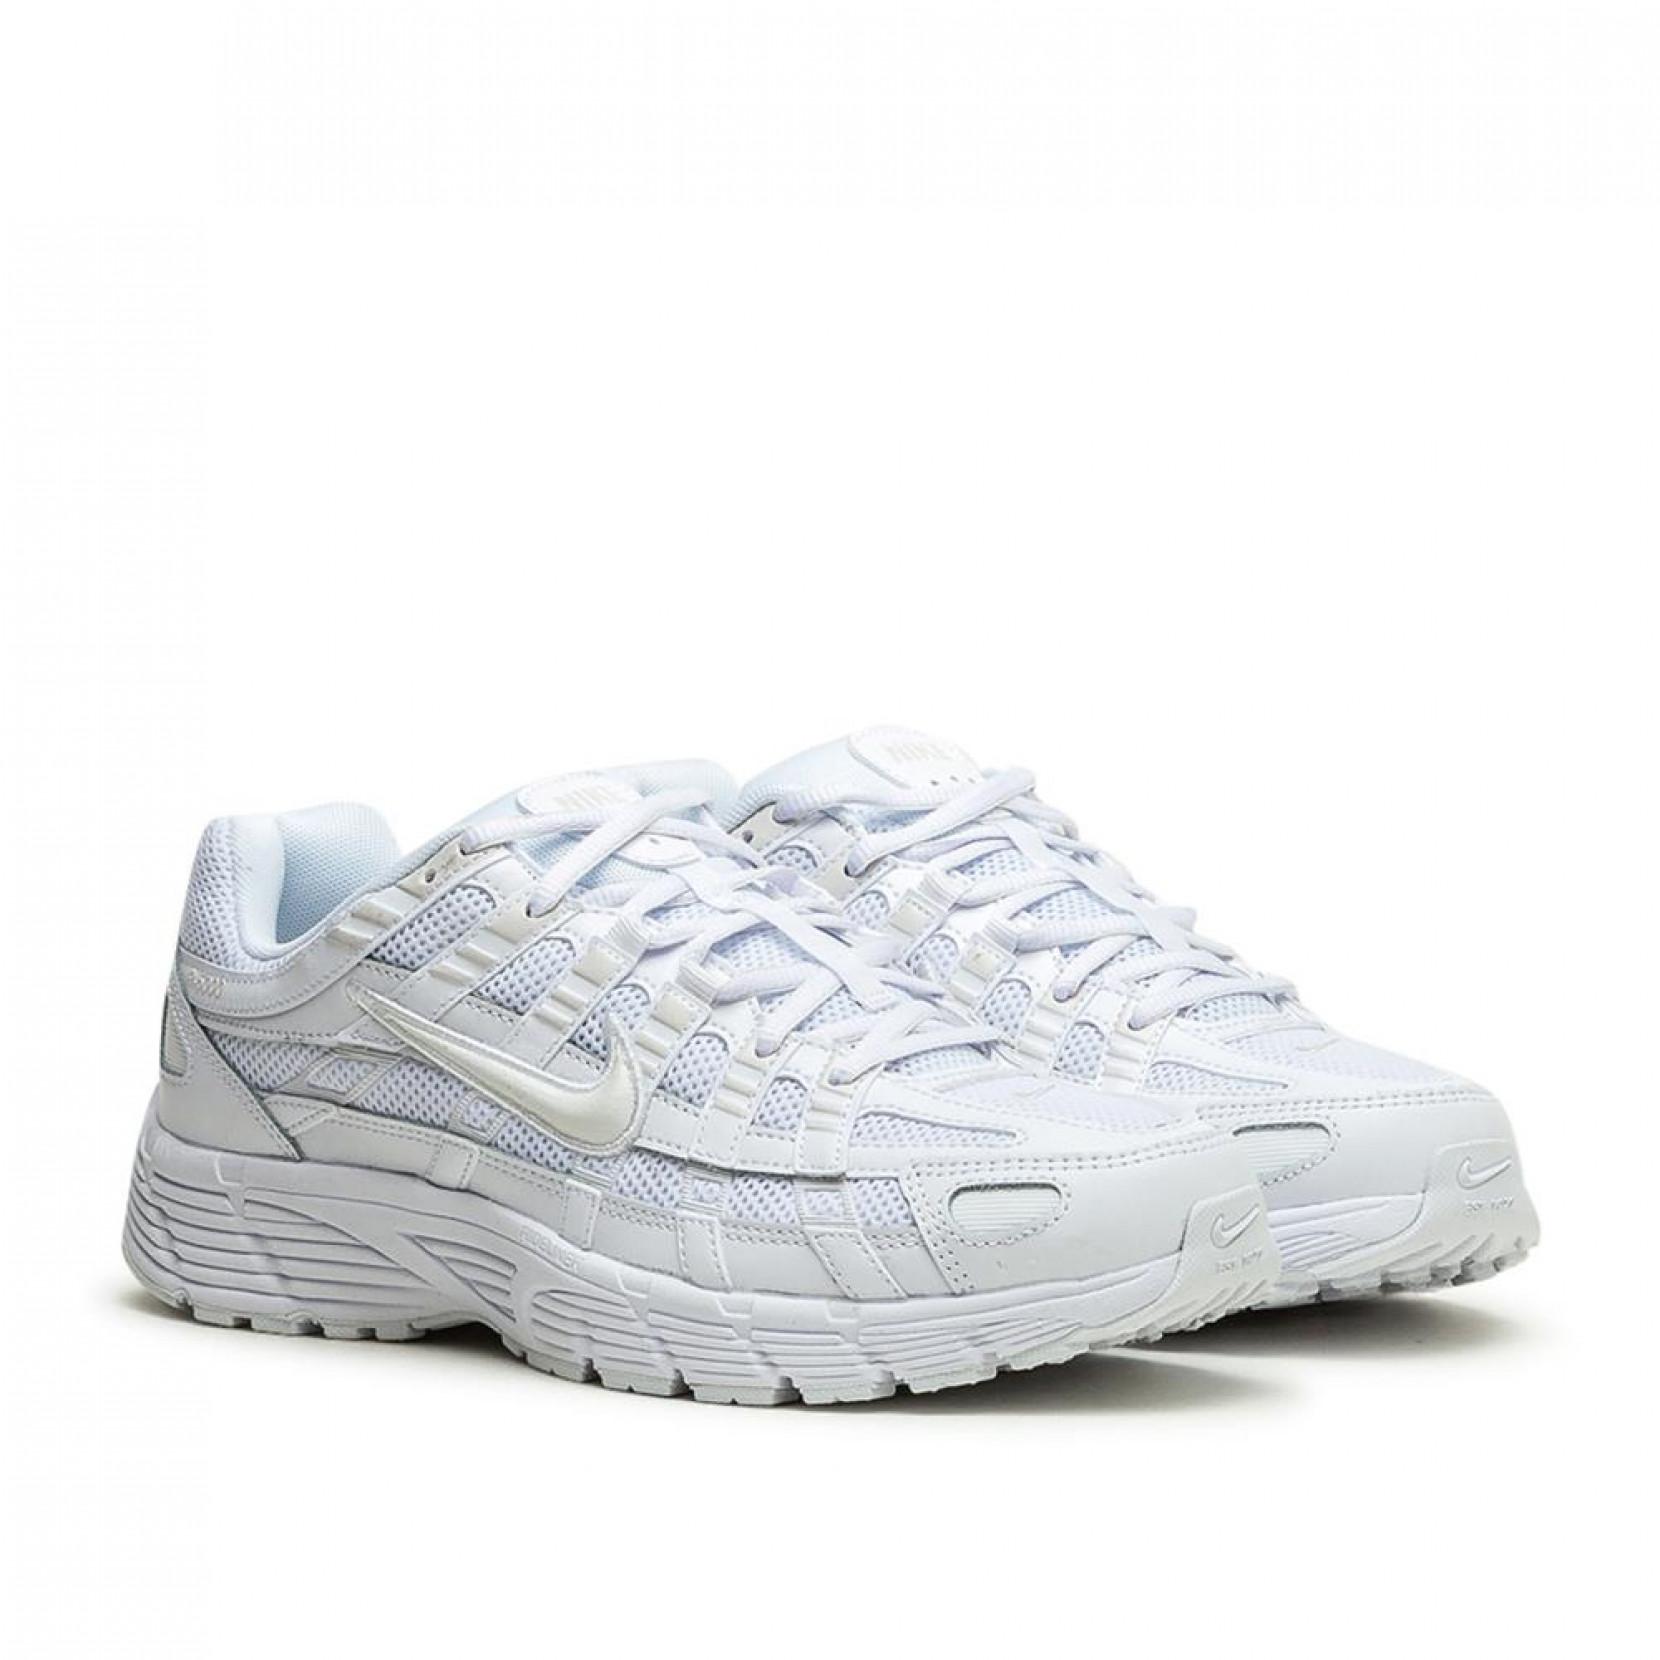 Nike Leather P-6000 in wh/wh (White) - Lyst